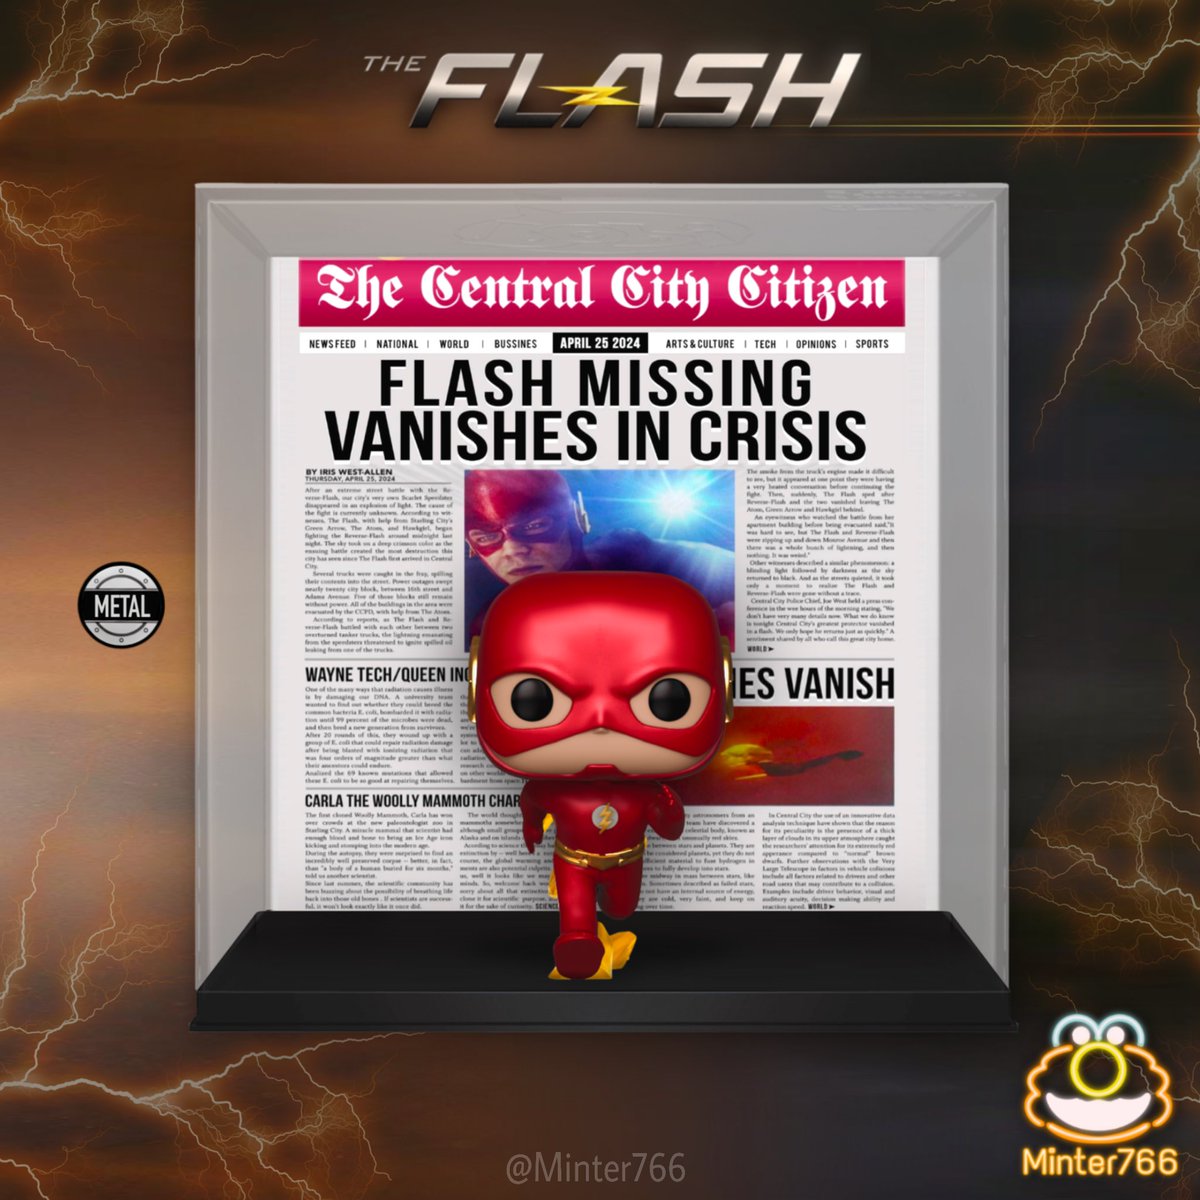 Flash Missing Vanishes in Crisis (Newspaper Cover).